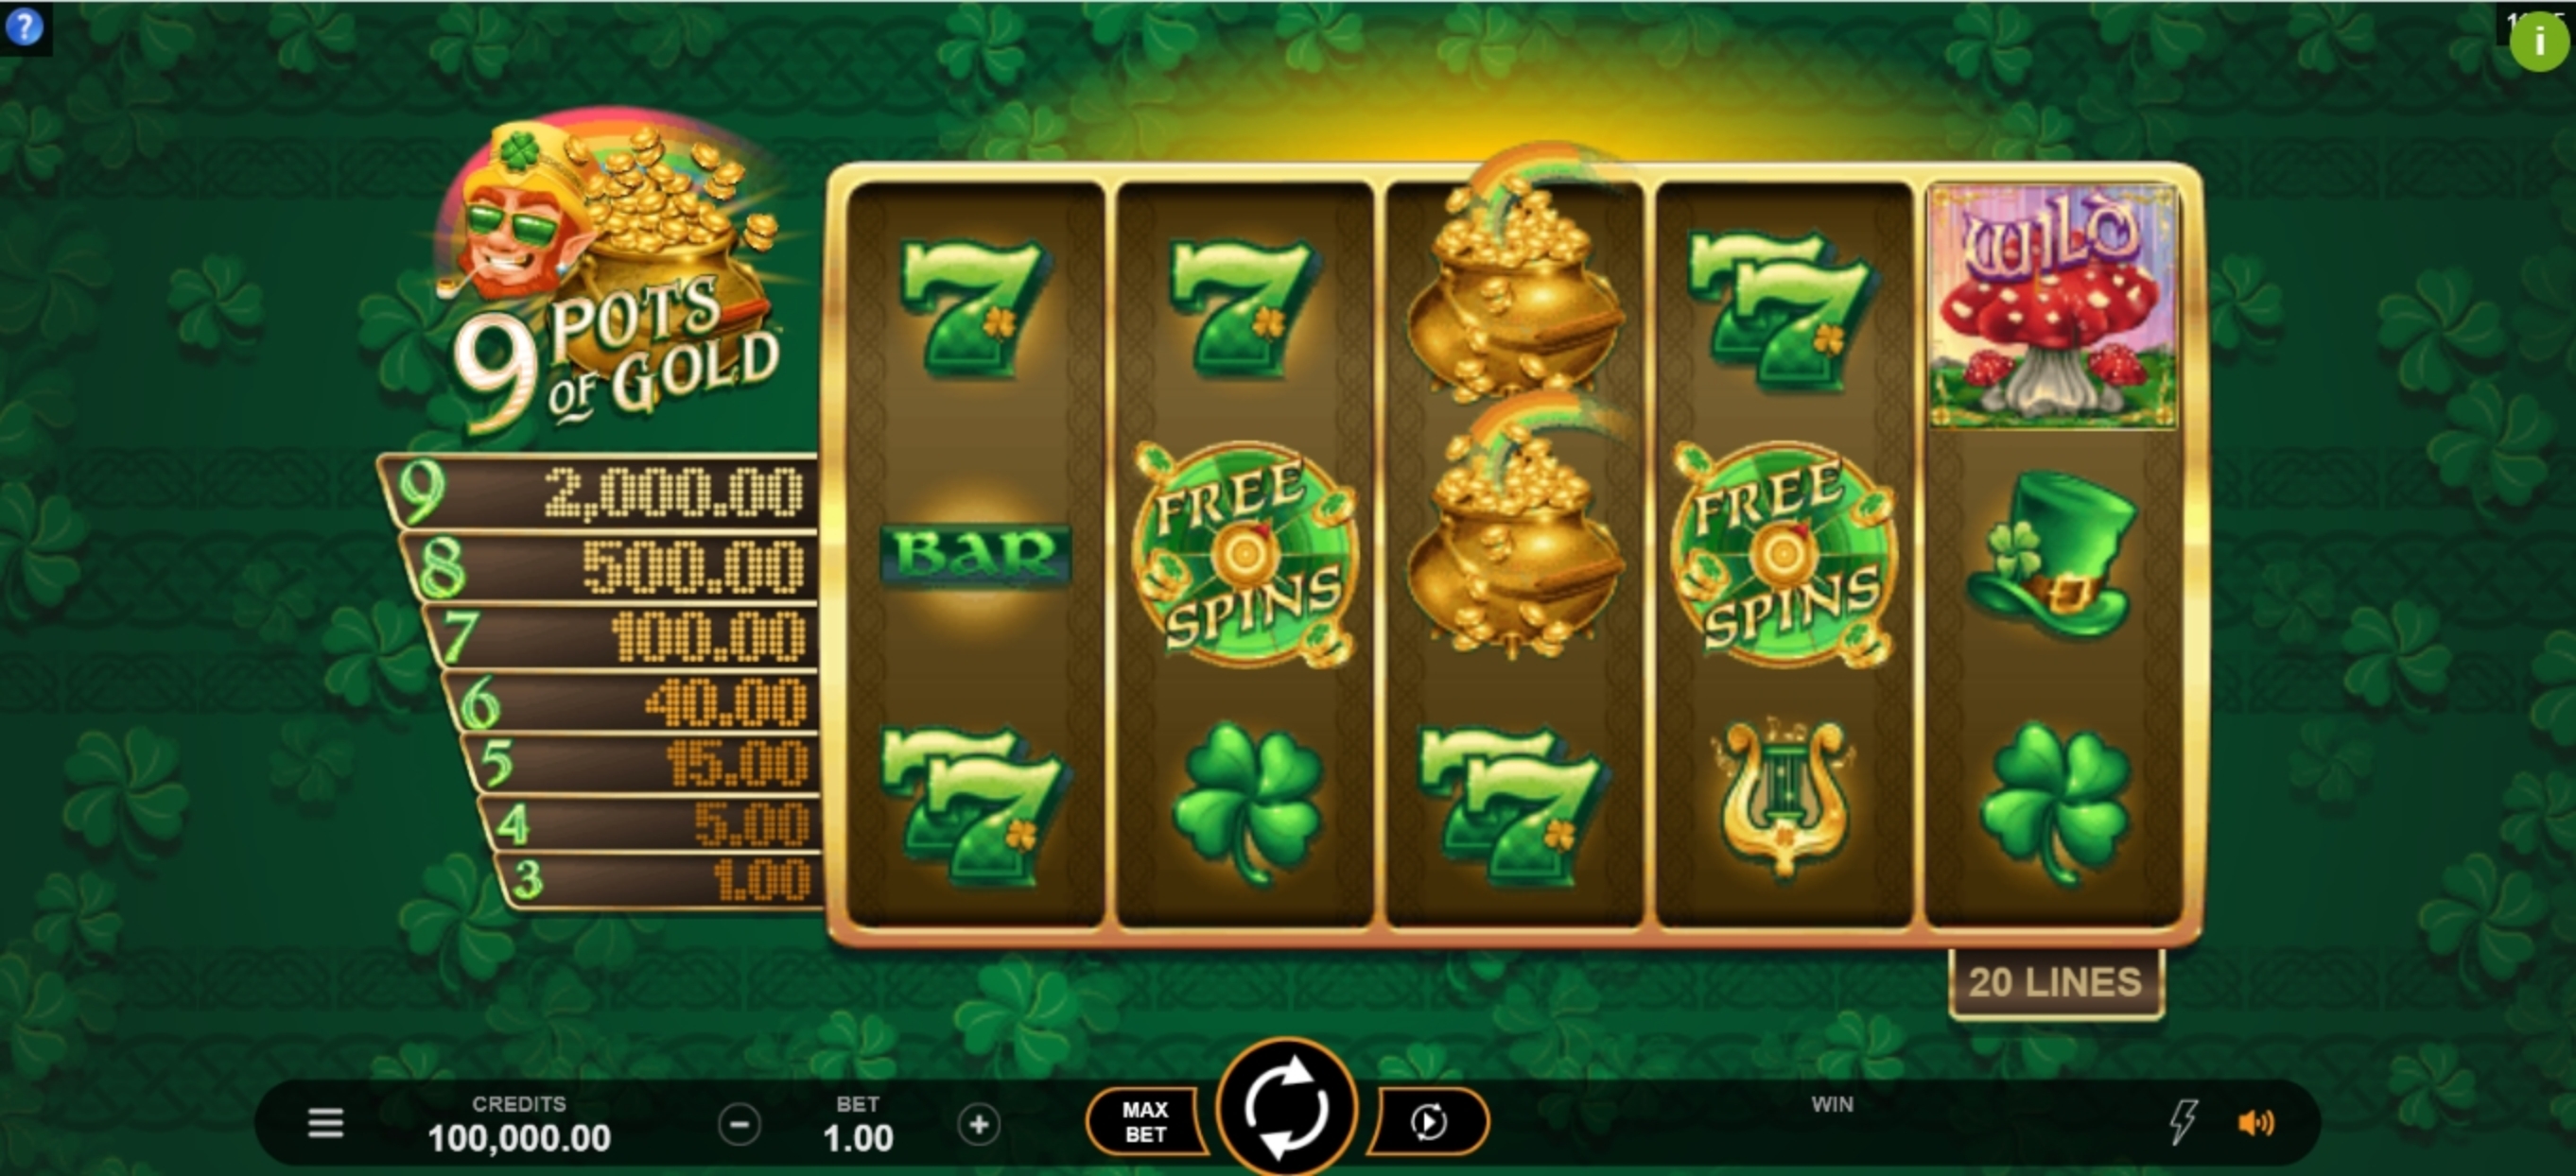 Reels in 9 Pots of Gold Slot Game by Gameburger Studios